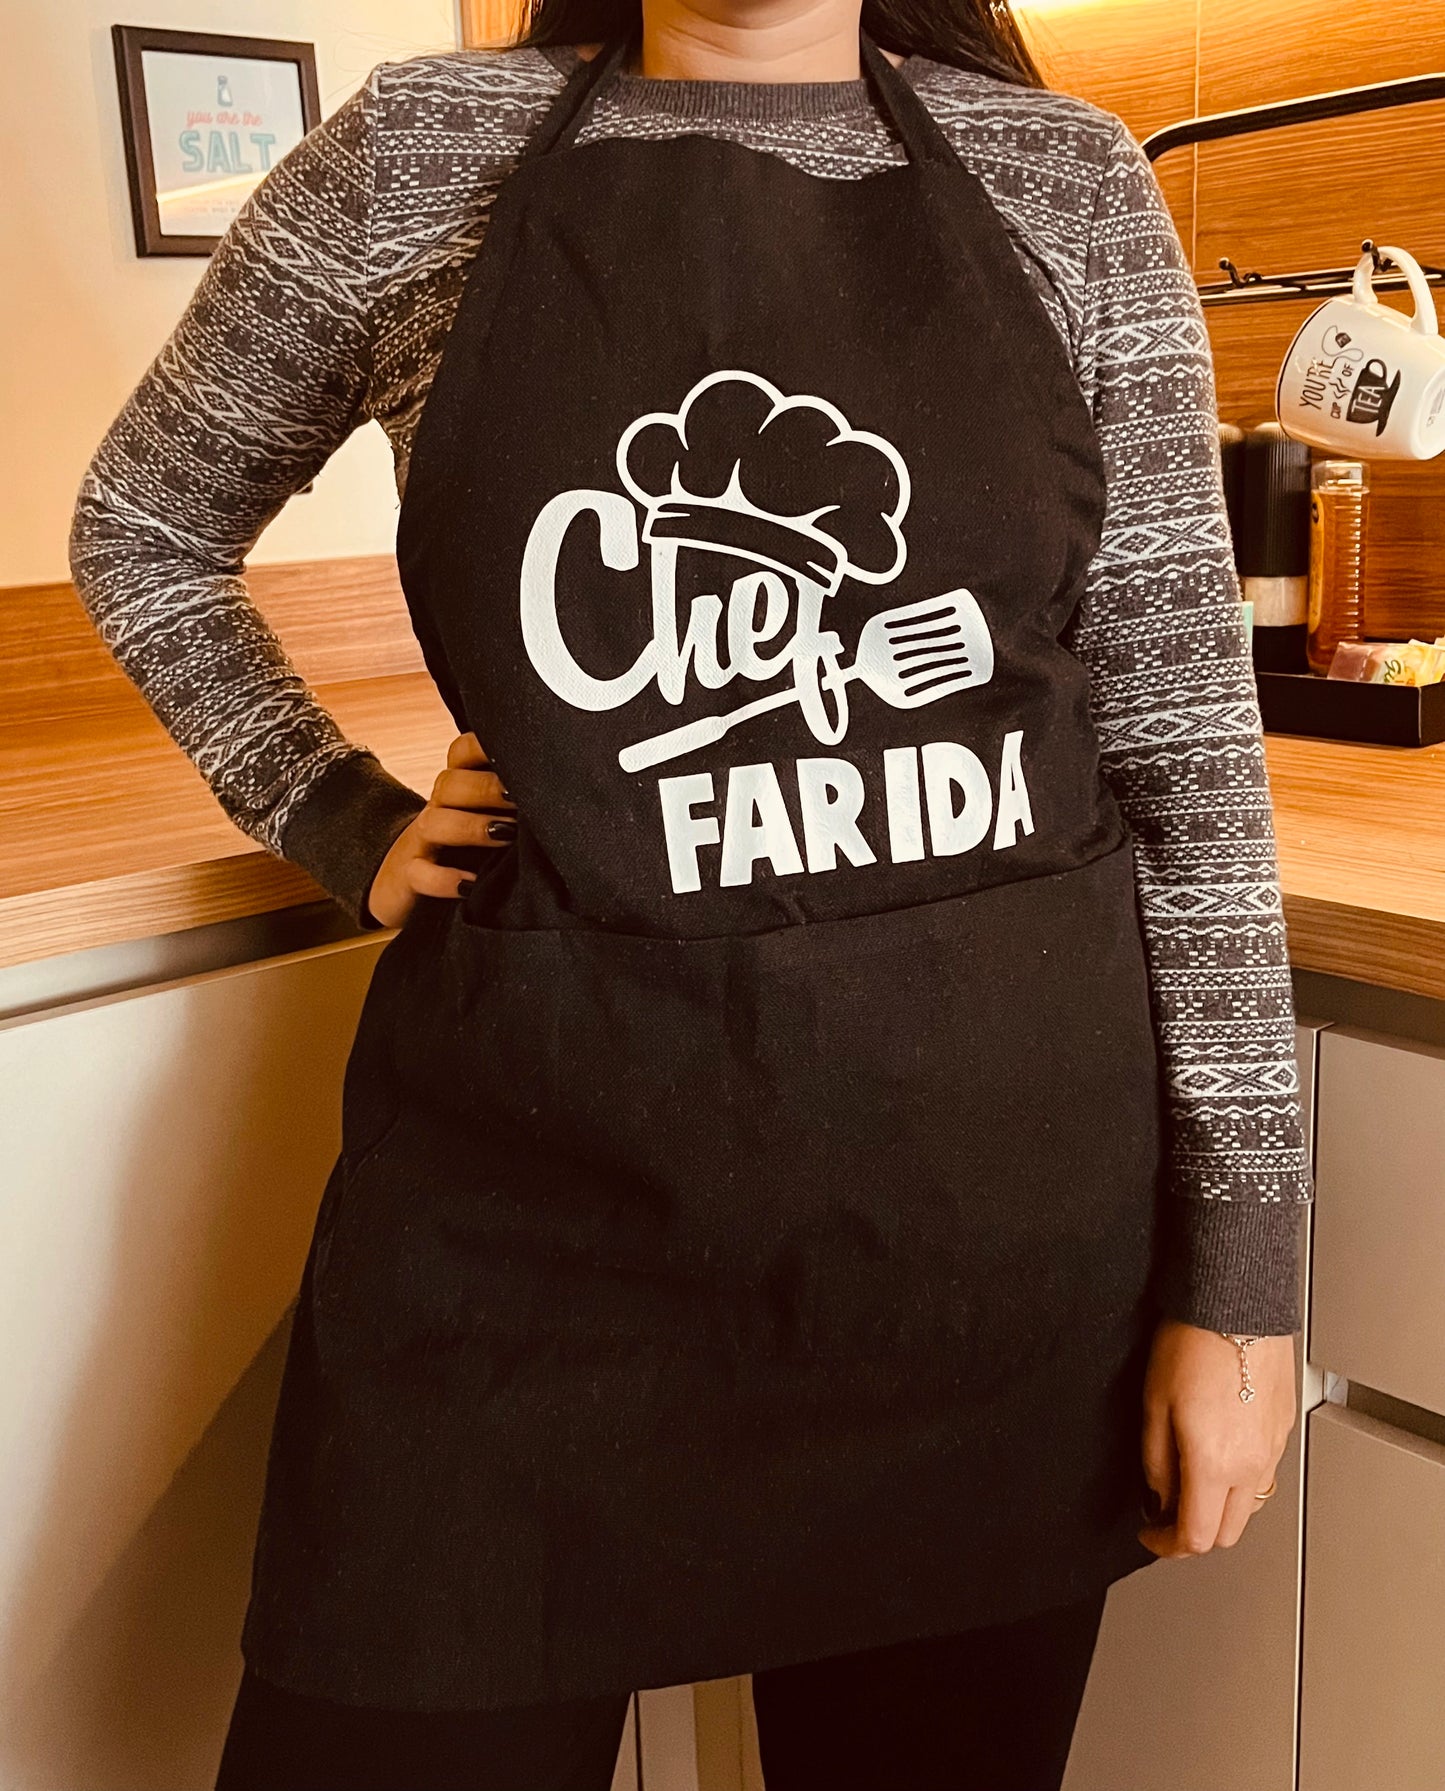 Homemade with Love Apron